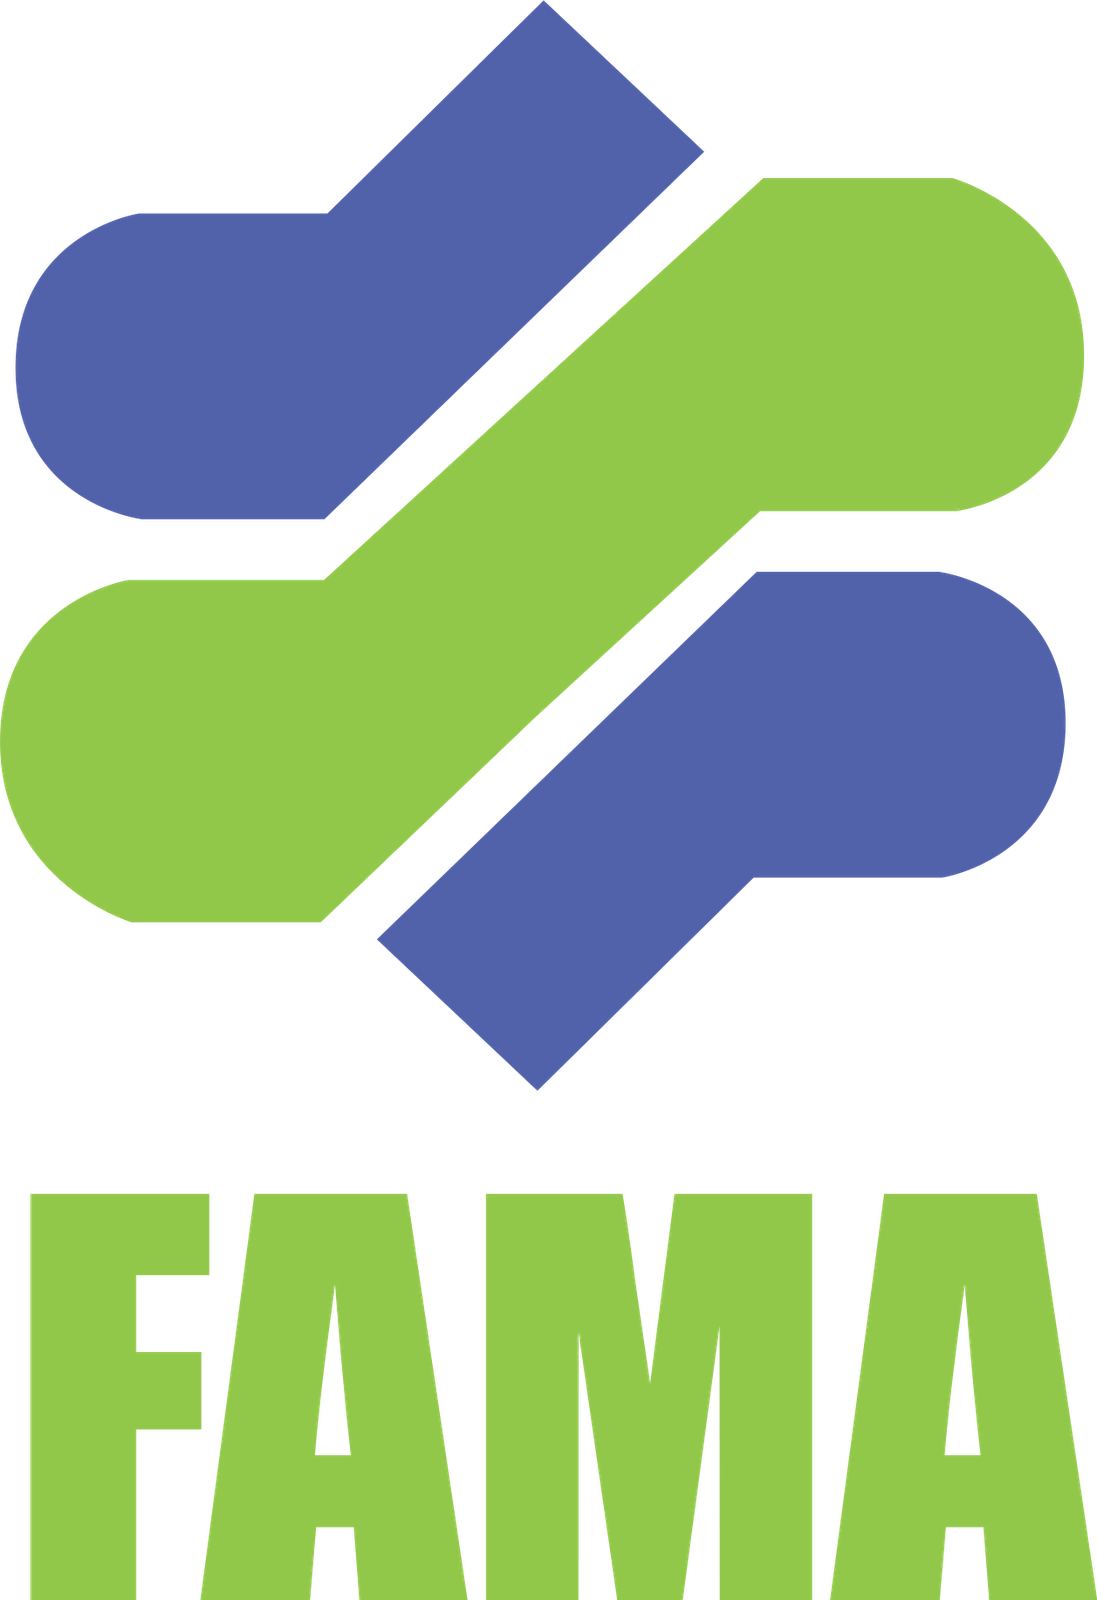 Federal Agricultural Marketing Authority (FAMA)